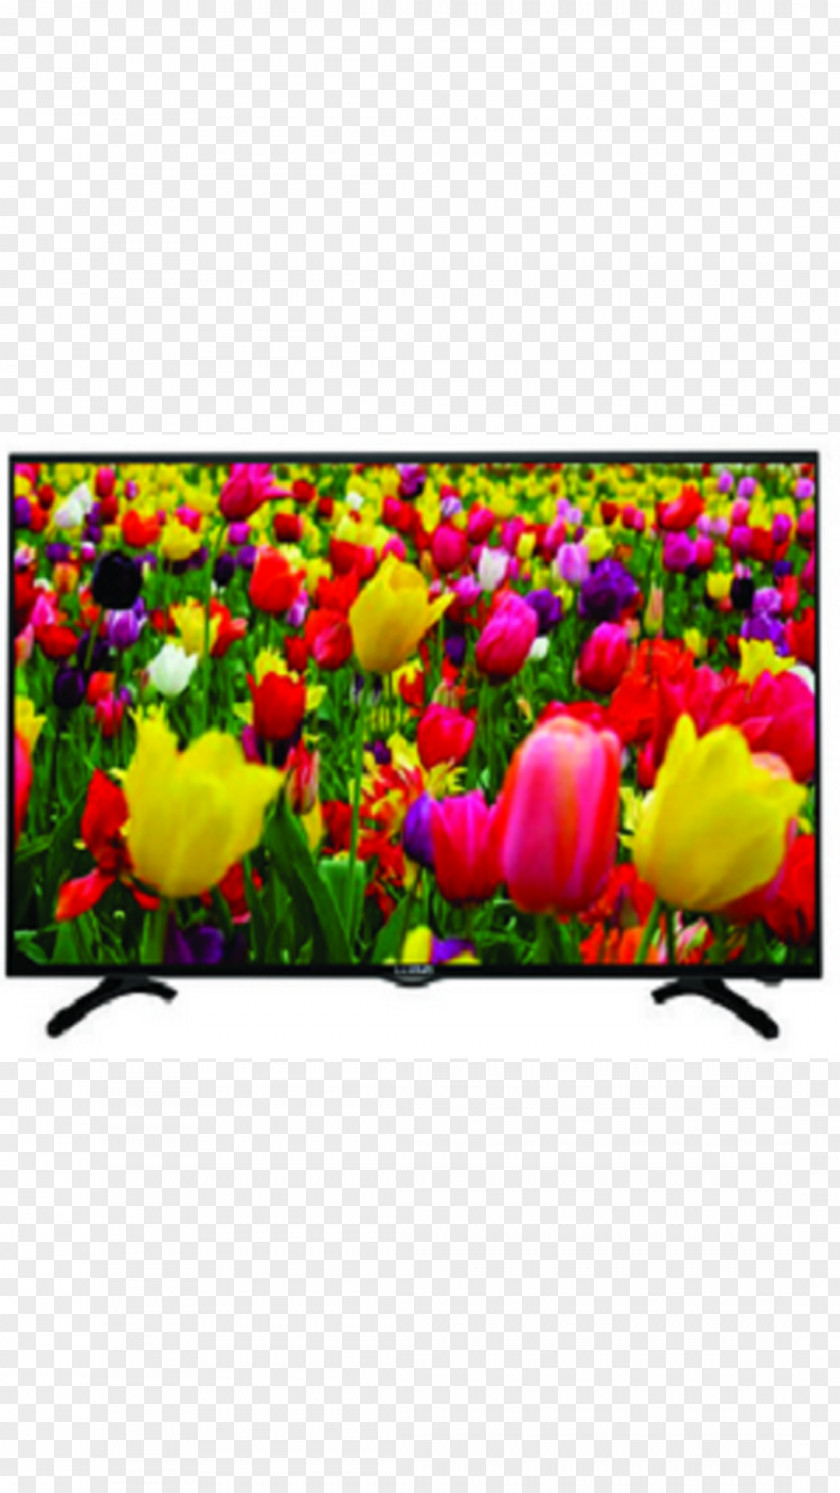 Led Tv LED-backlit LCD High-definition Television HD Ready 1080p PNG